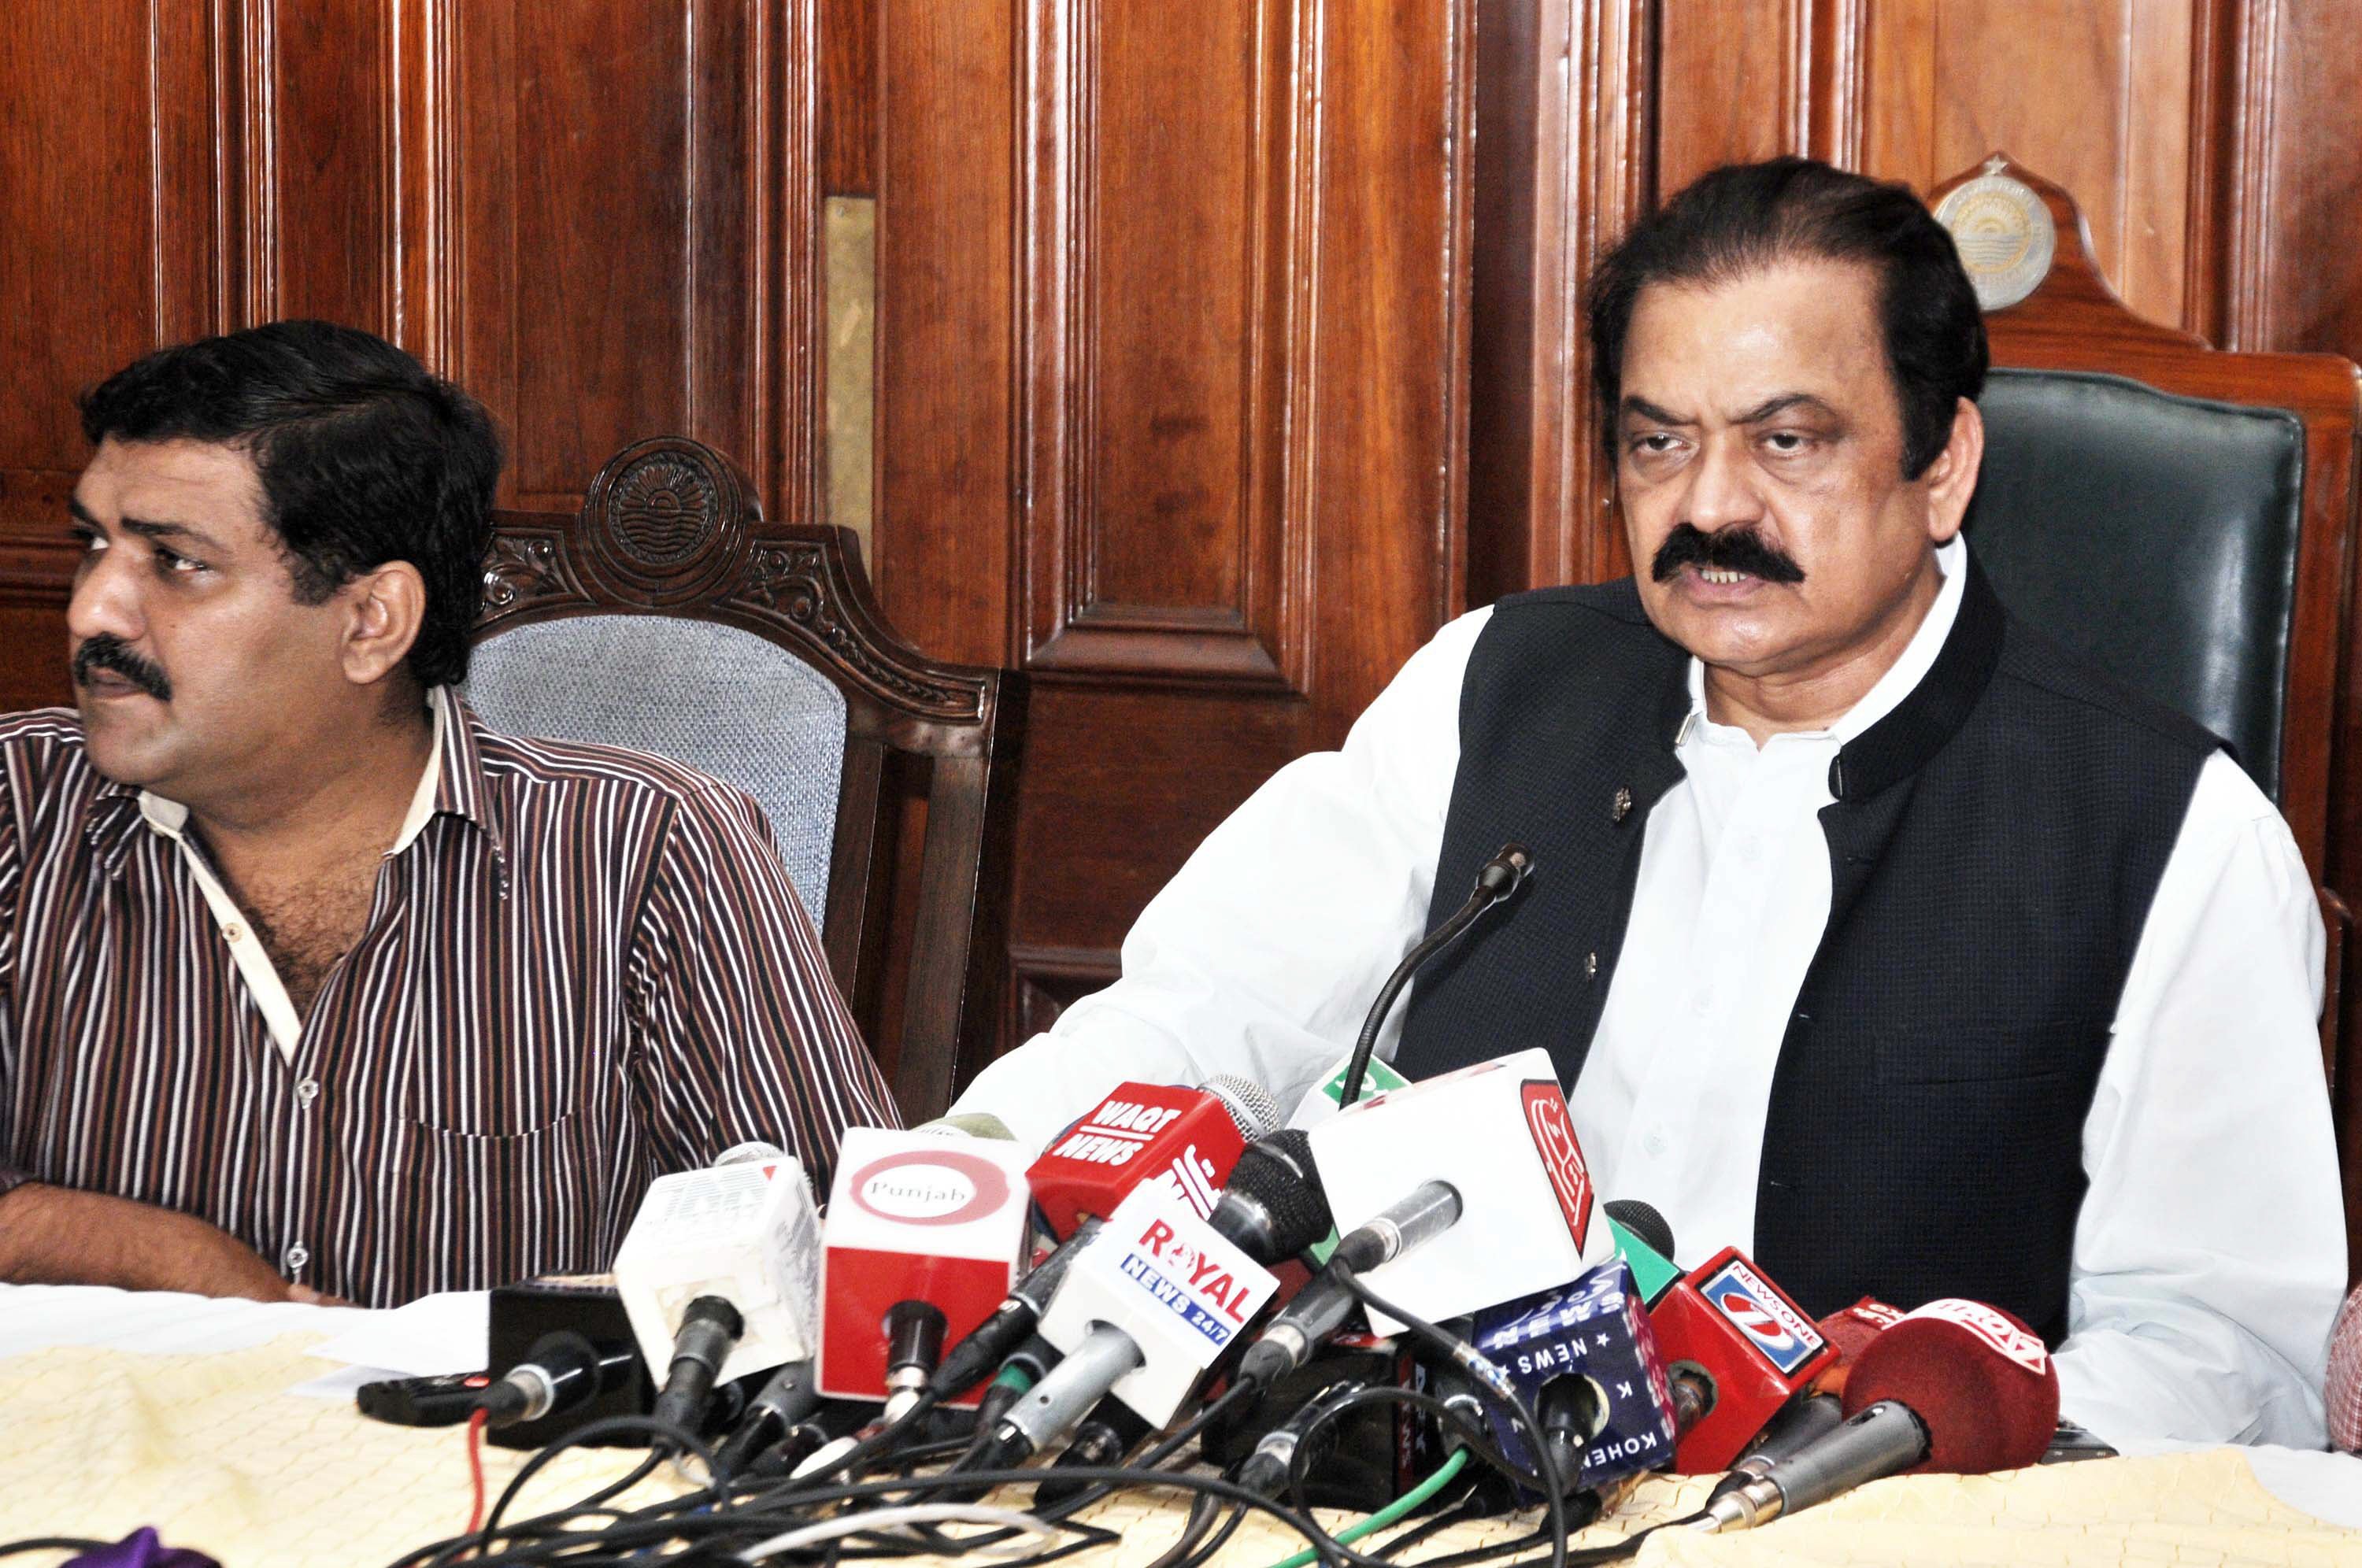 punjab law minister rana sanaullah addresses a press conference at the punjab assembly in lahore on august 25 2015 photo waseem nazir express